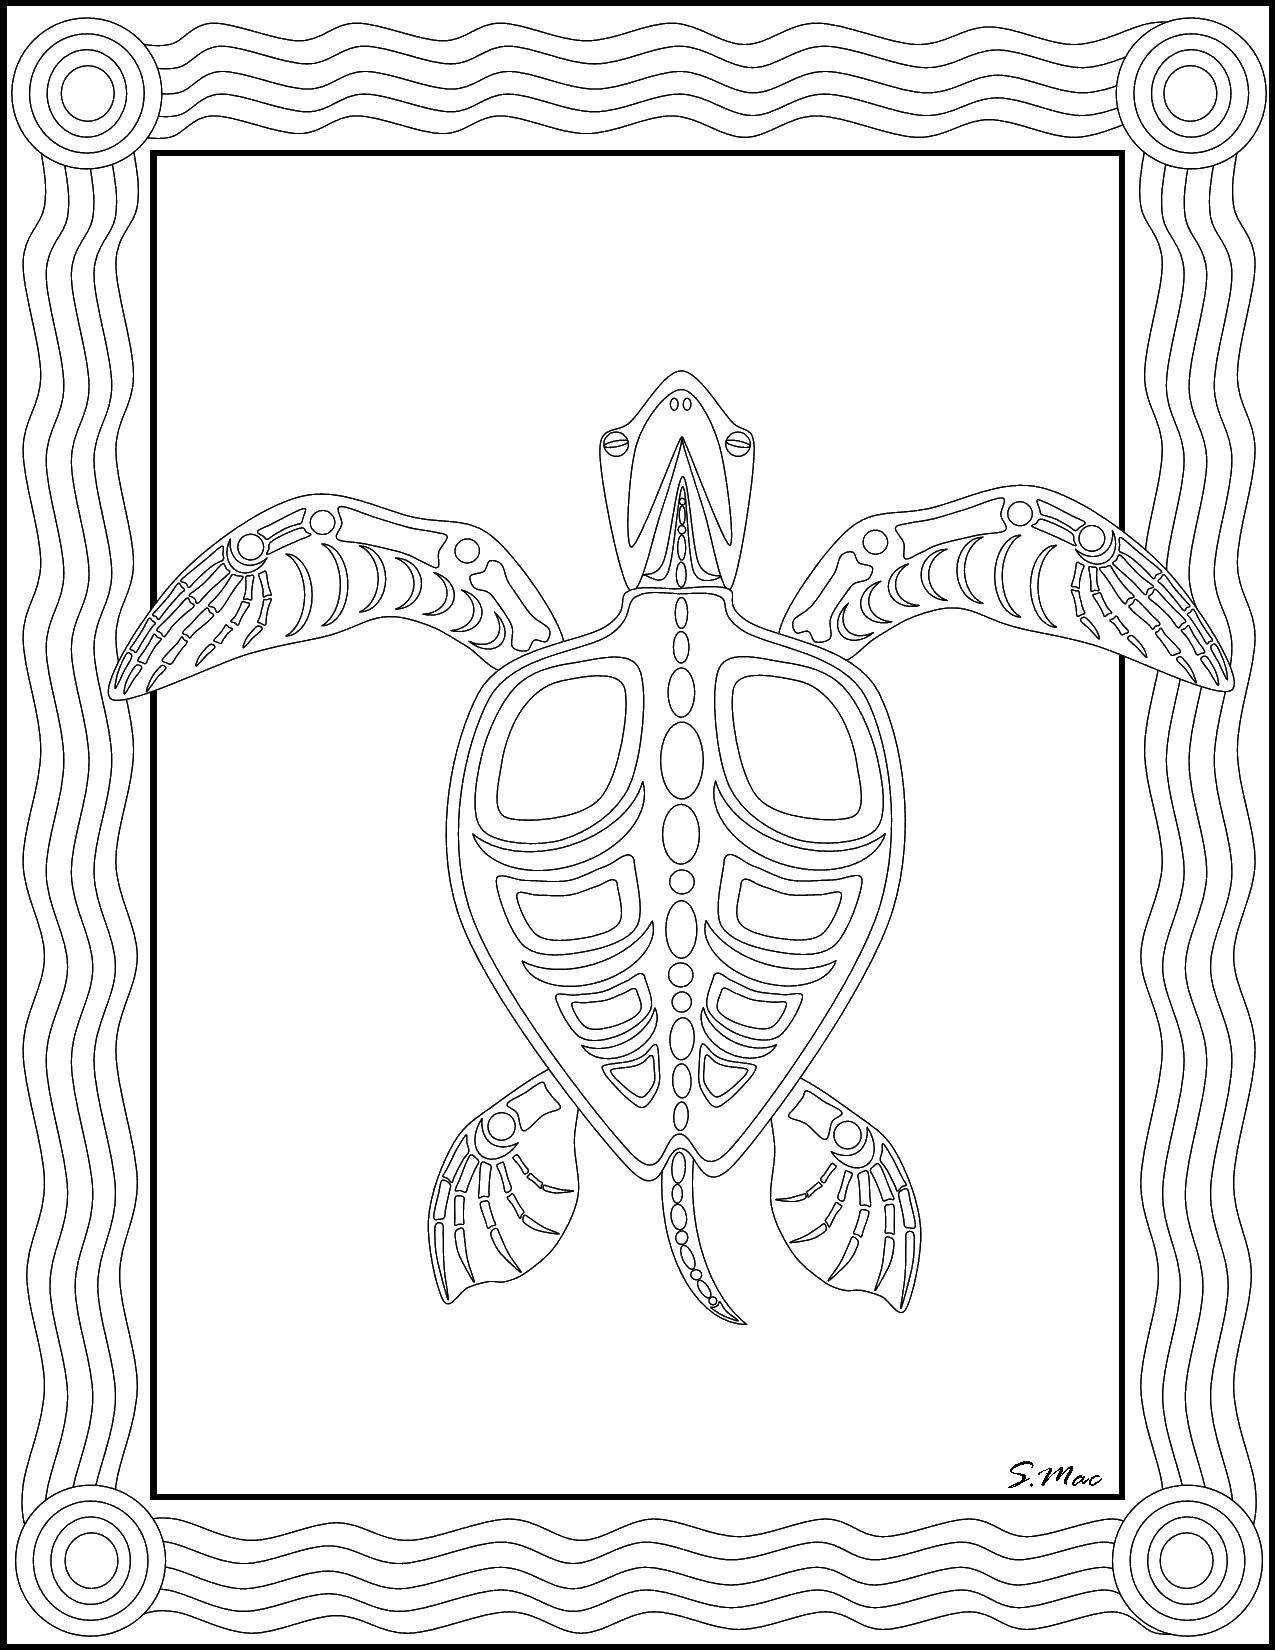 Coloring Sea turtle in the patterns. Category sea turtle. Tags:  turtle, sea, patterns.